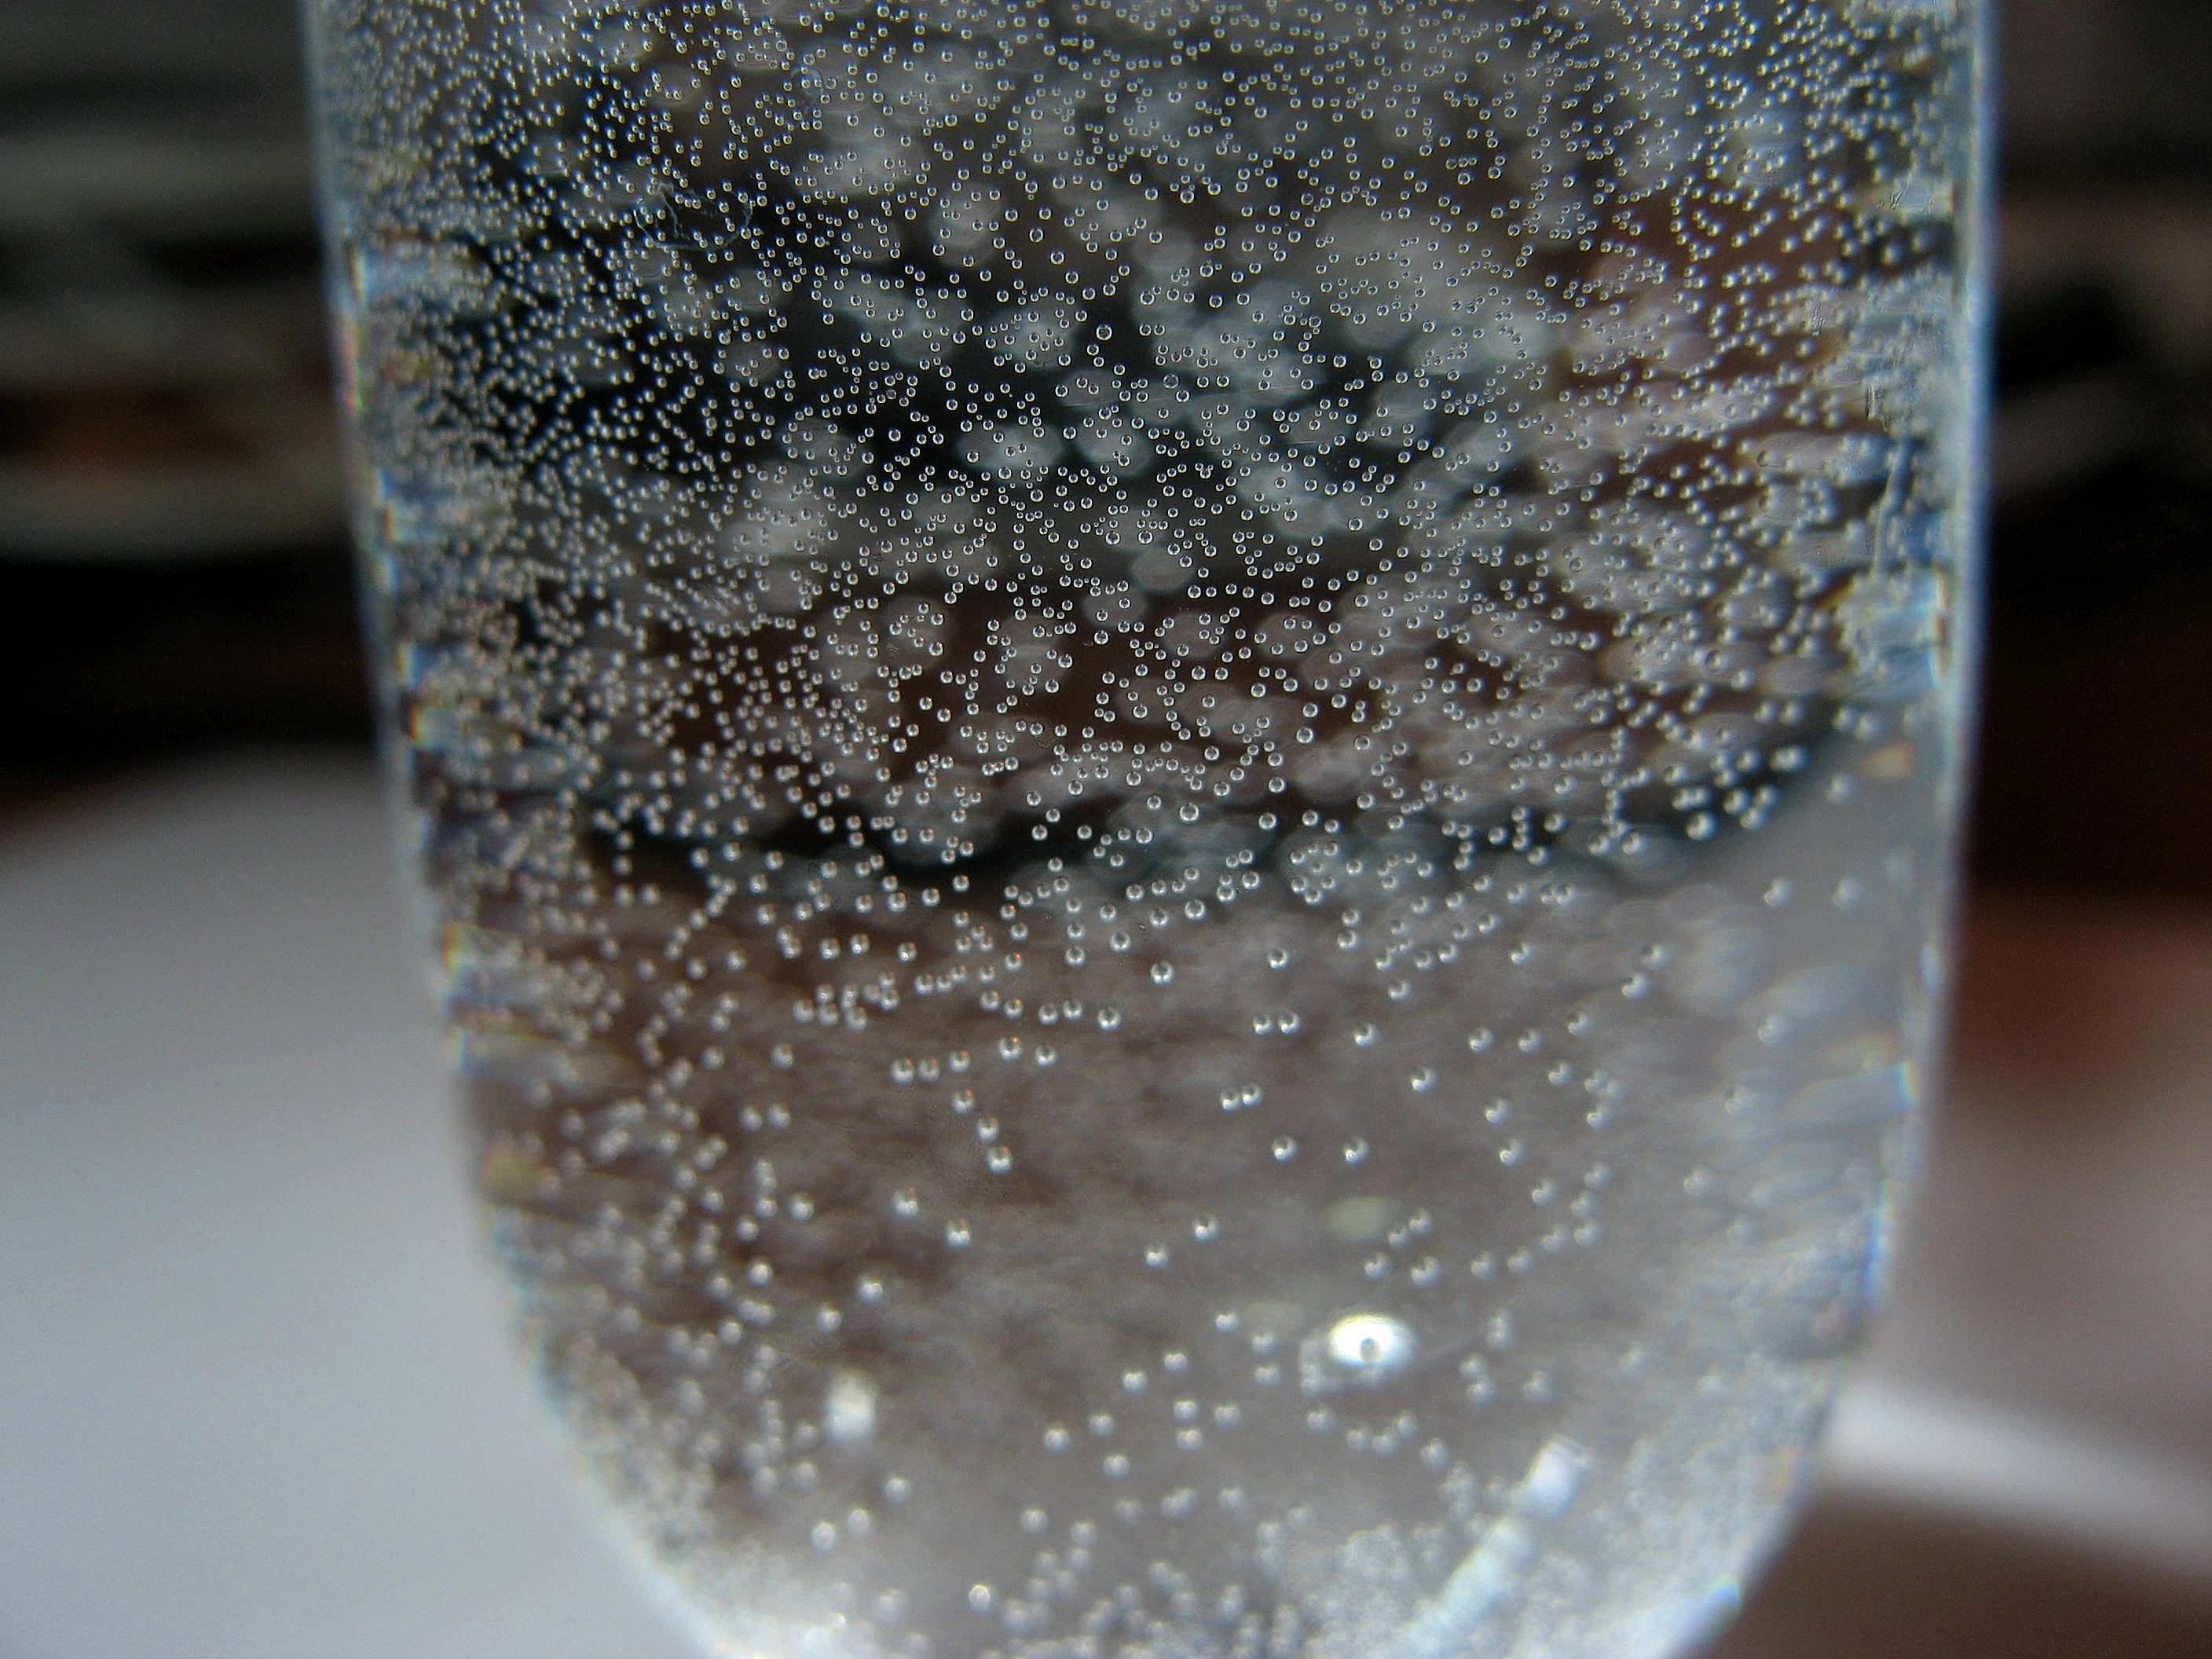 File:Bubbles in glass of water.jpg - Wikimedia Commons